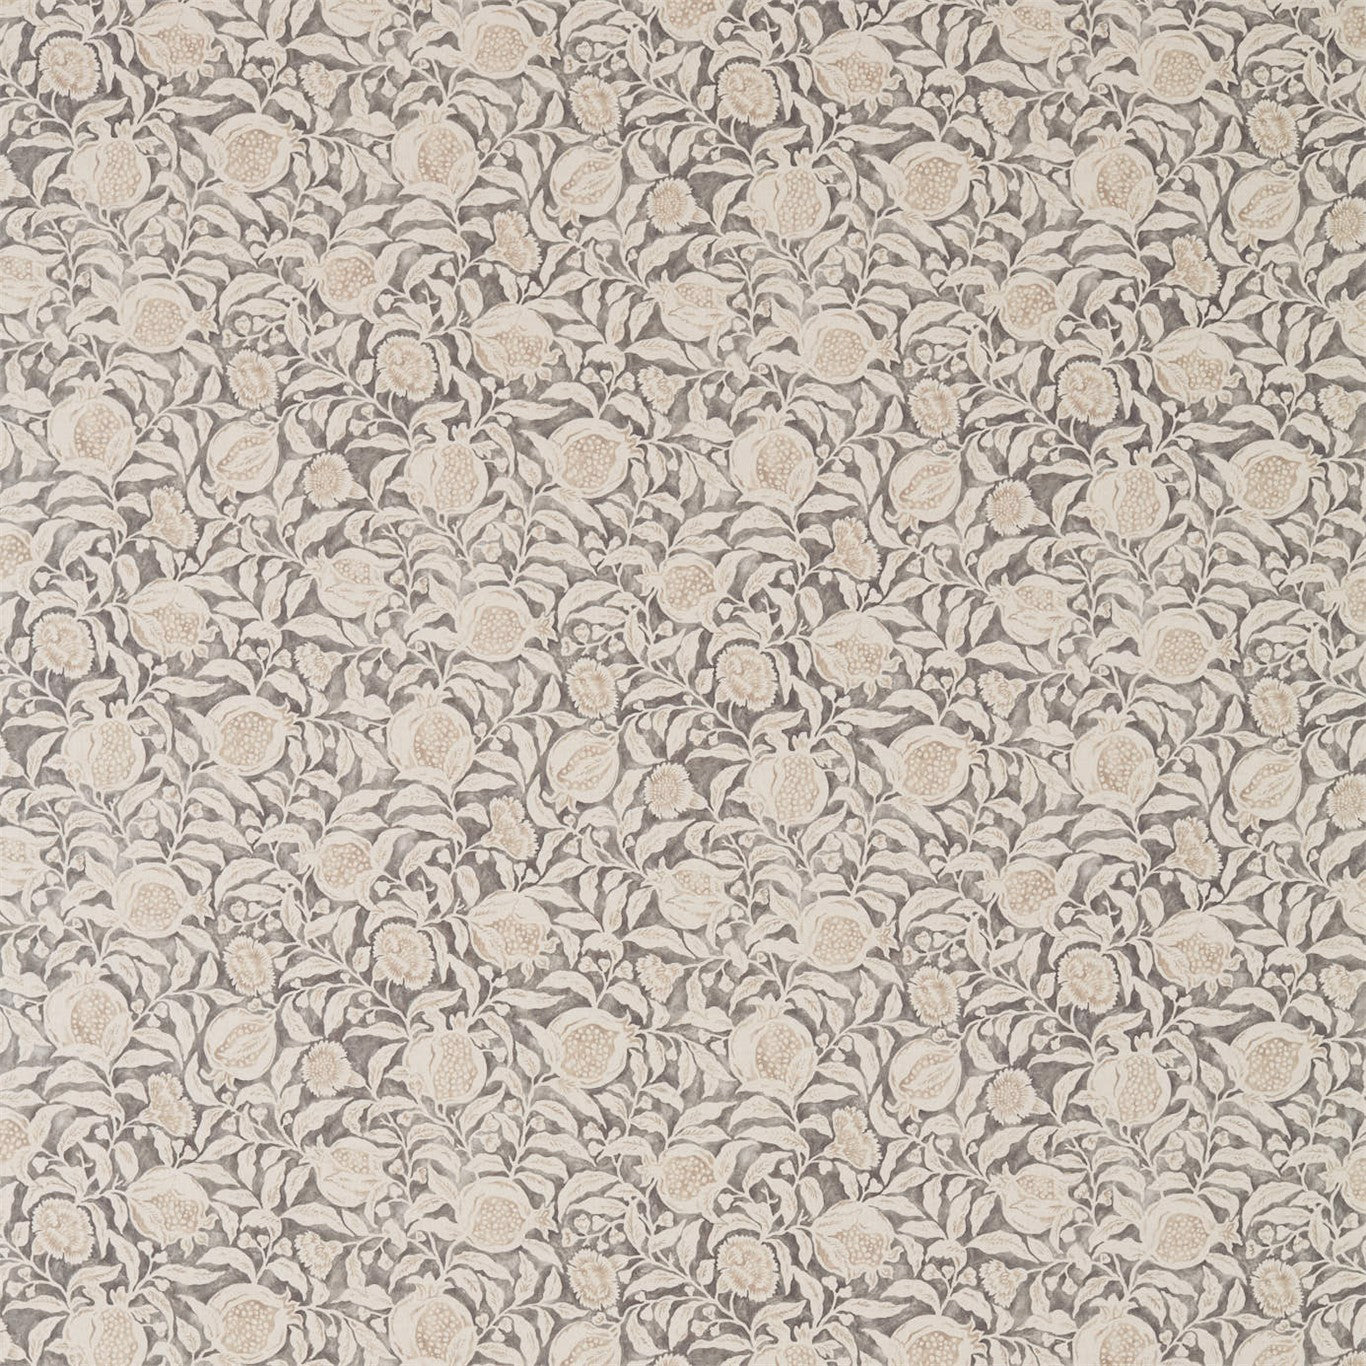 Annandale Fabric by Sanderson - DDAM226374 - Charcoal/Linen